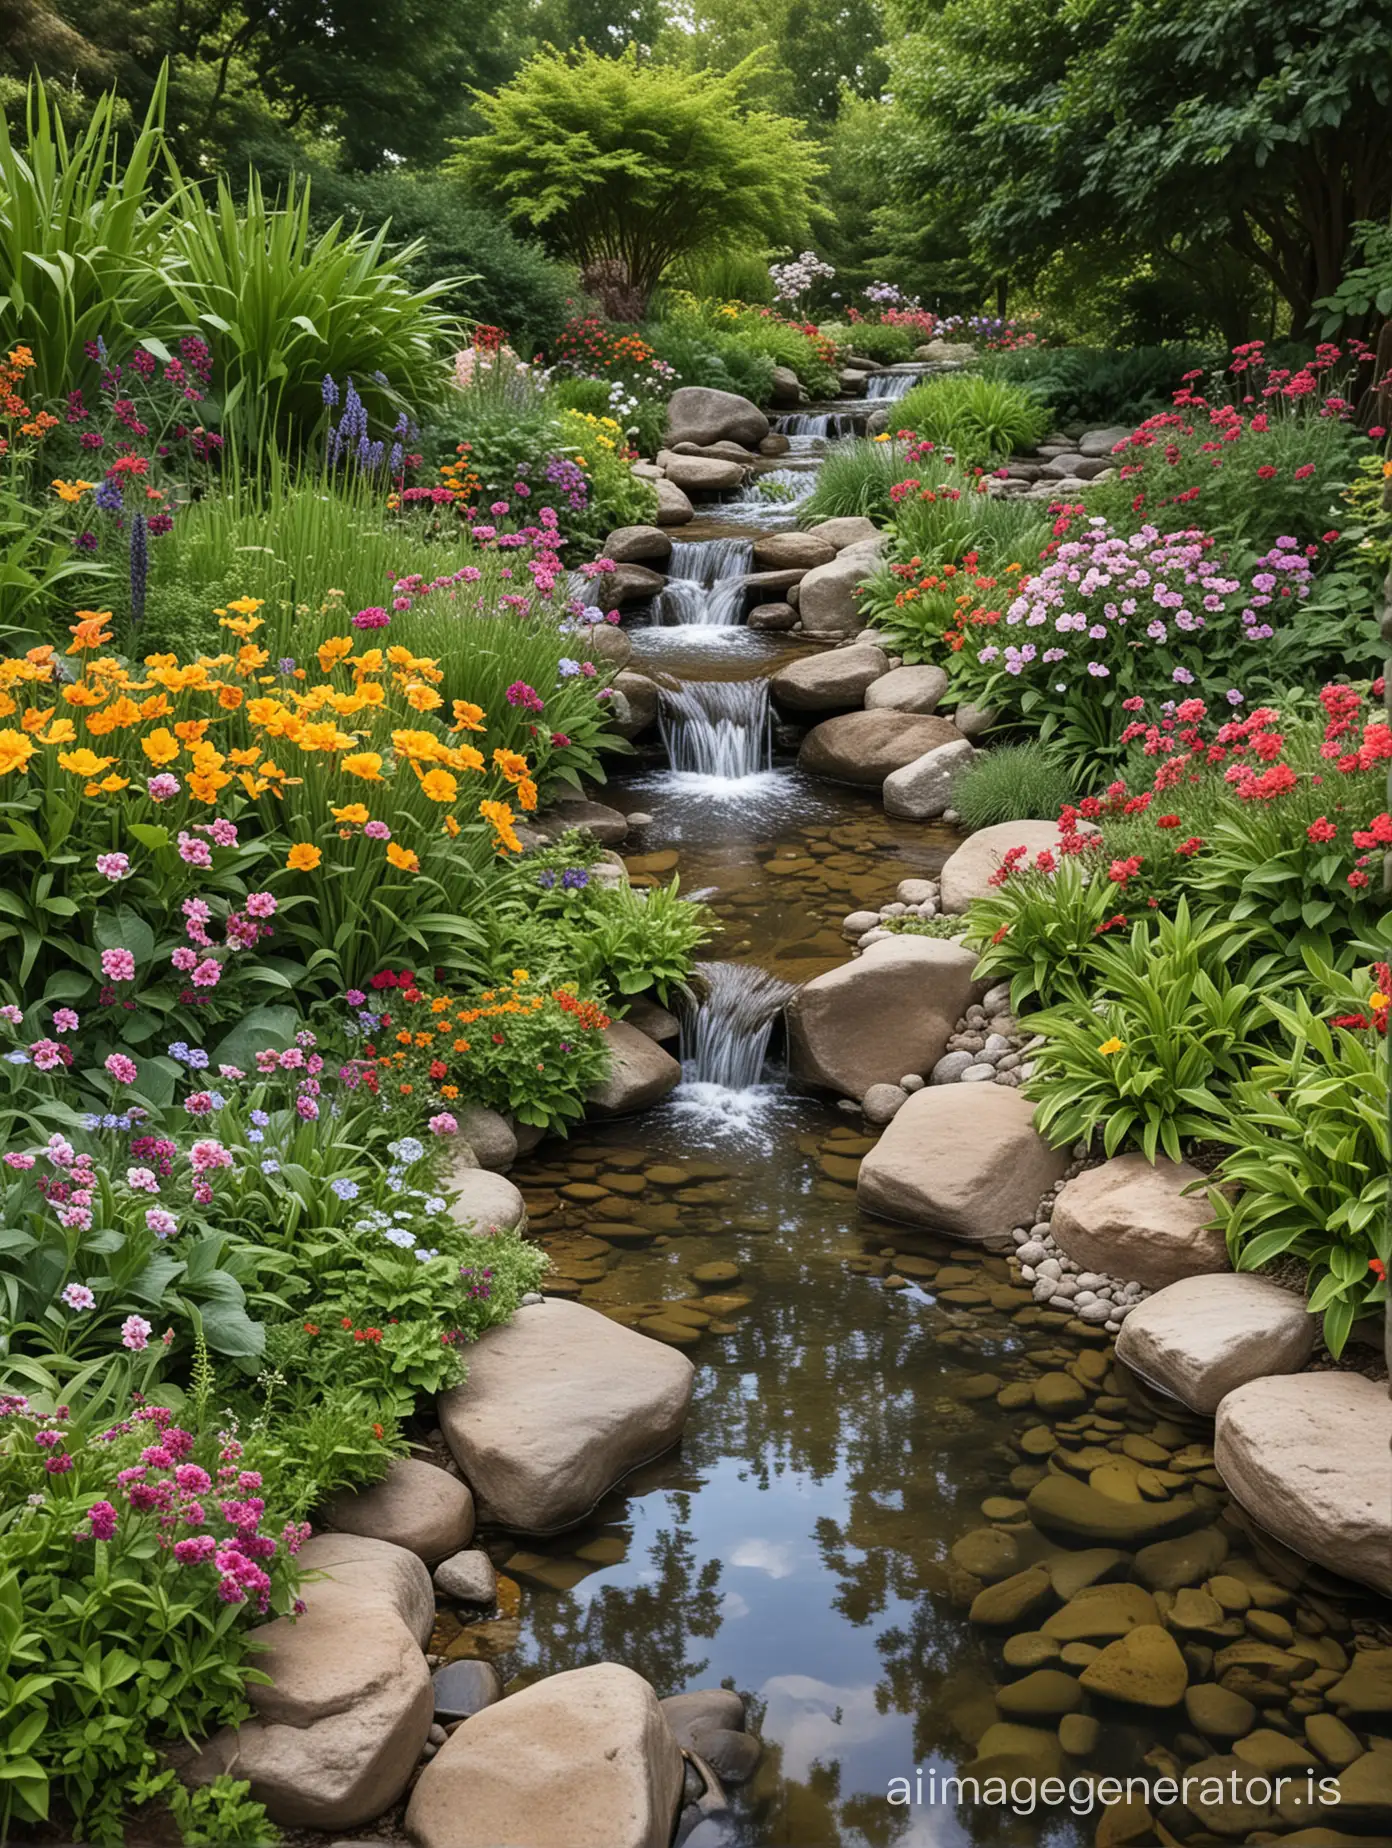 A tranquil garden setting with colorful flowers and a gentle stream flowing